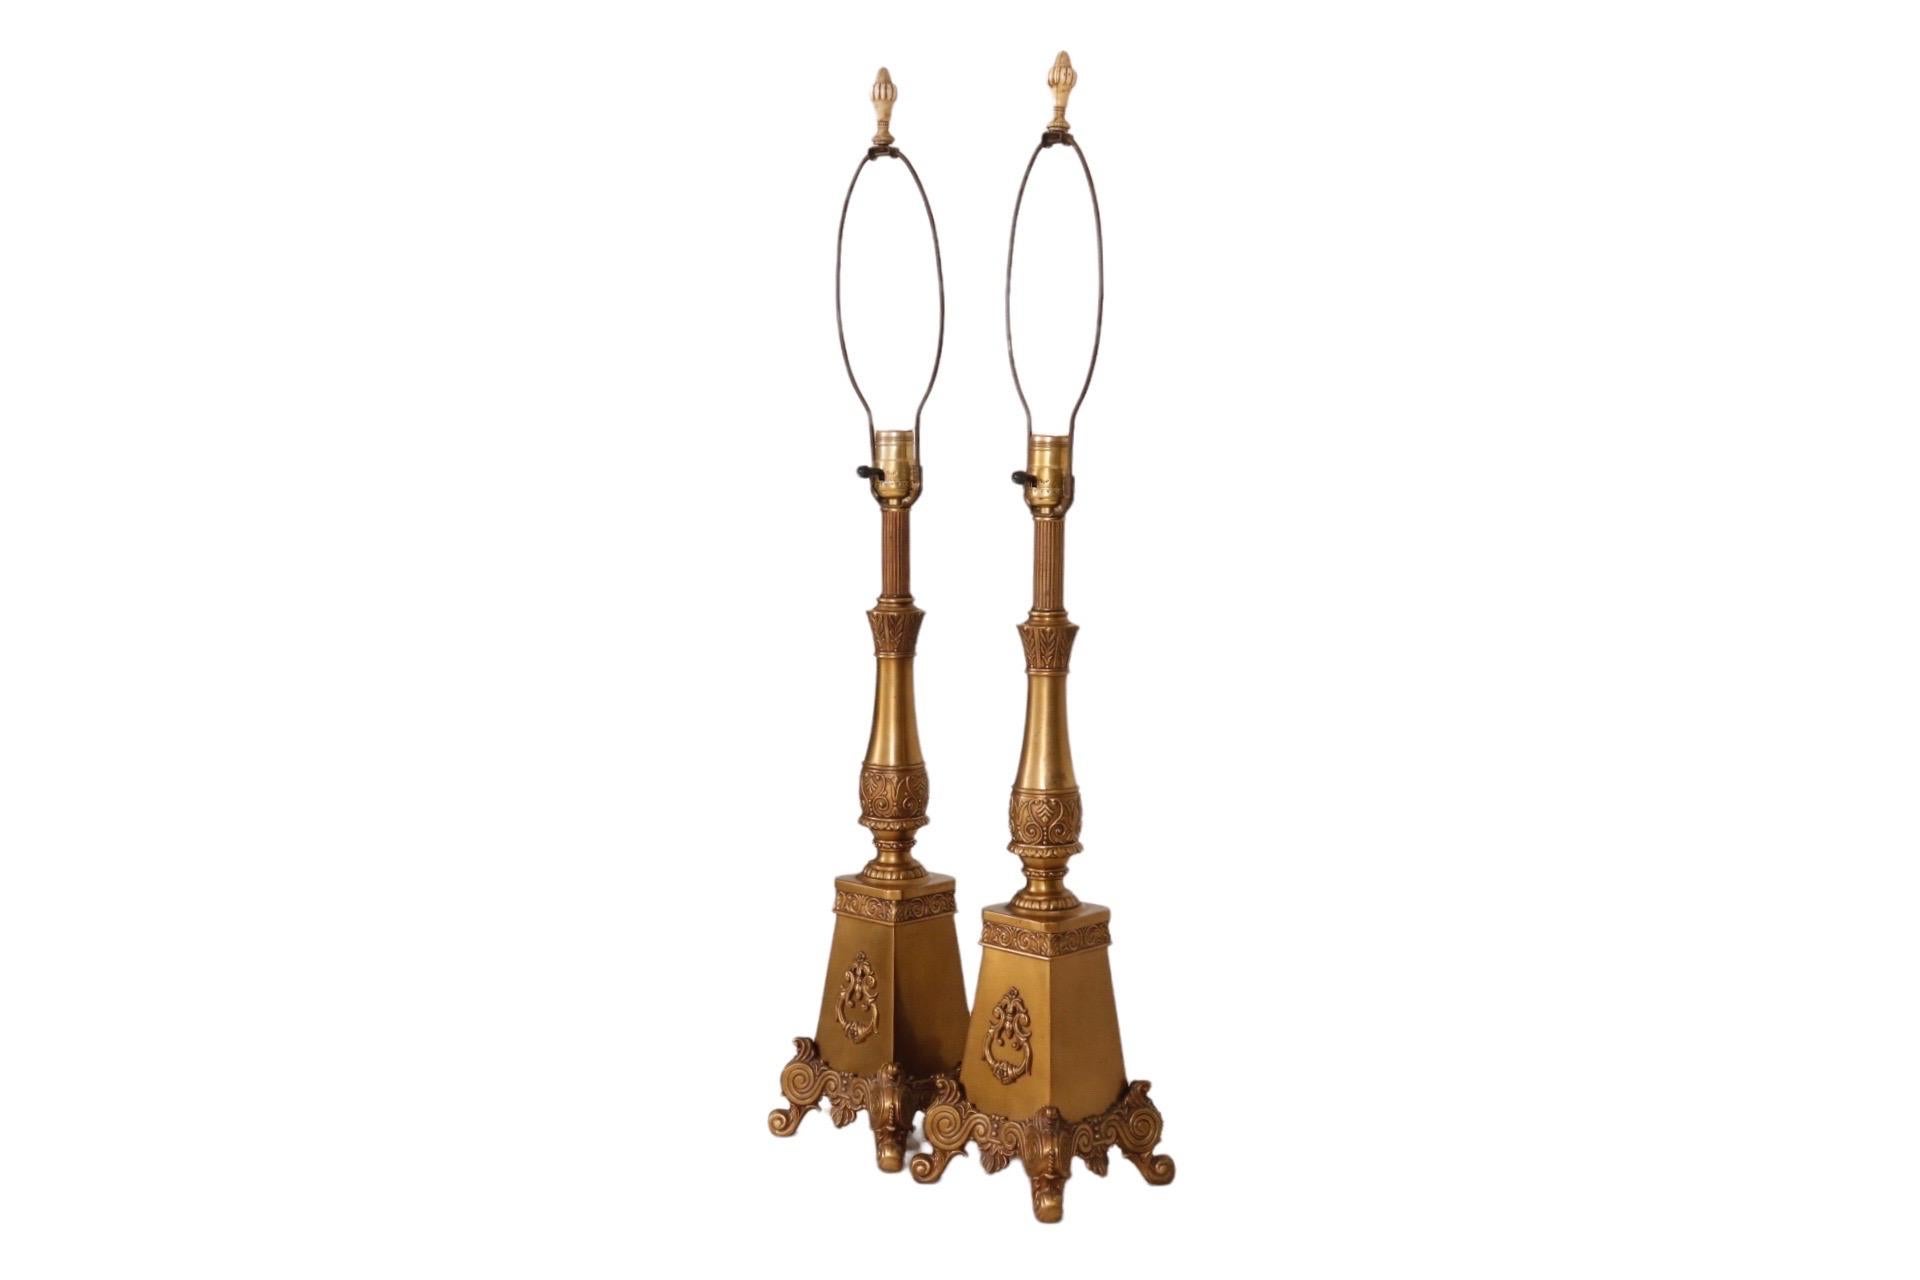 A pair of French Regency style table lamps made of brass. A short fluted column sits above a baluster shaped central column decorated with branches of olive leaves around the neck, and scrolls with acanthus leaves around the bottom. Below, a plinth